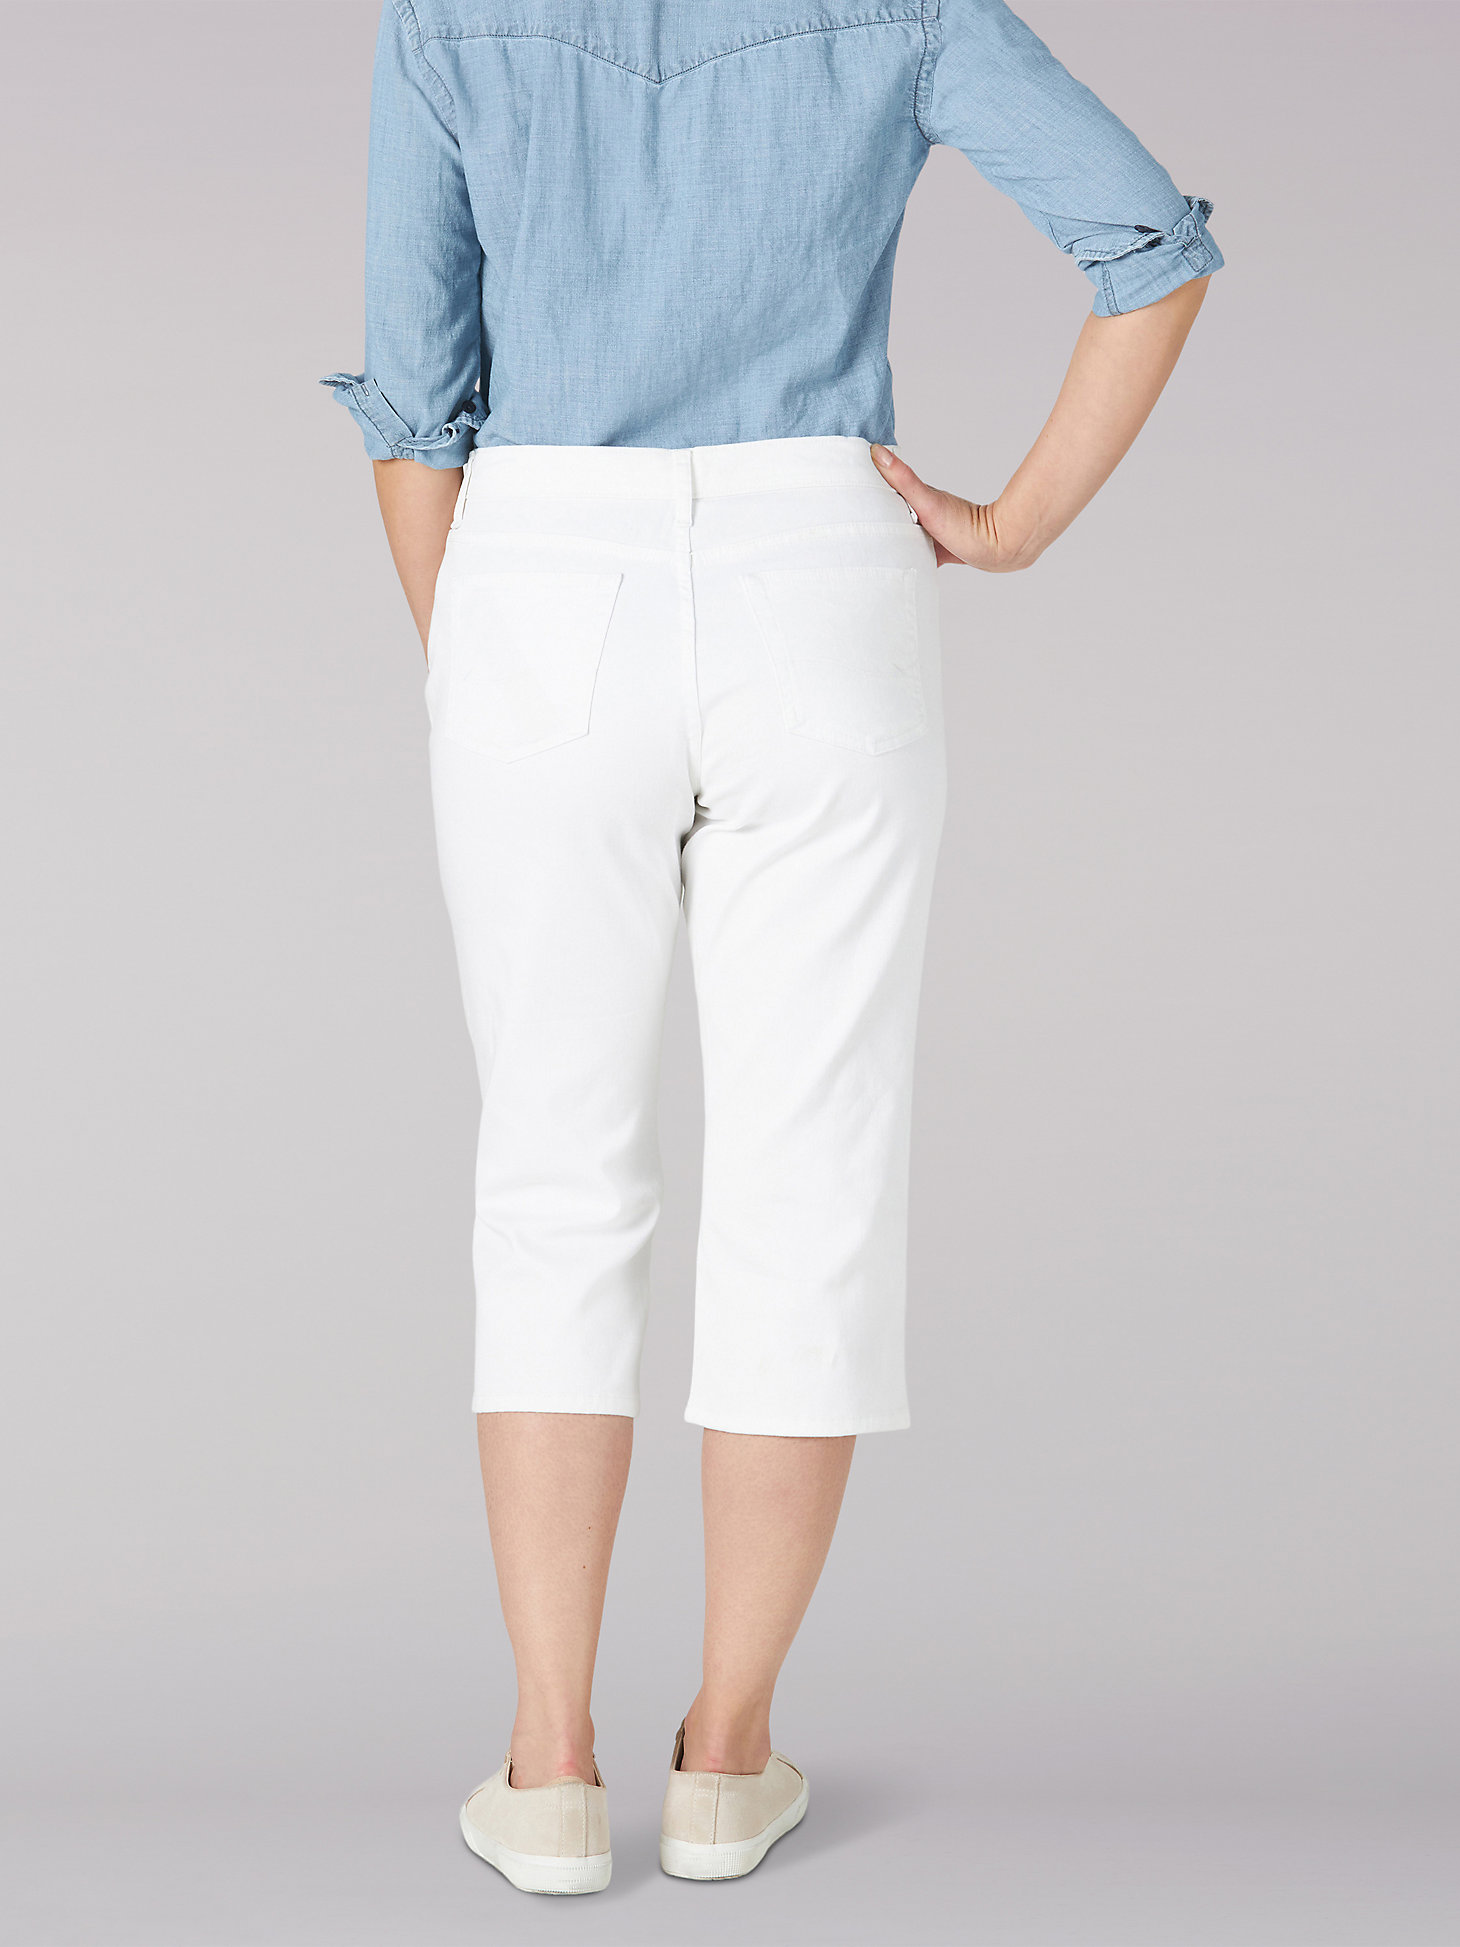 Women’s Relaxed Fit Capri in White alternative view 1